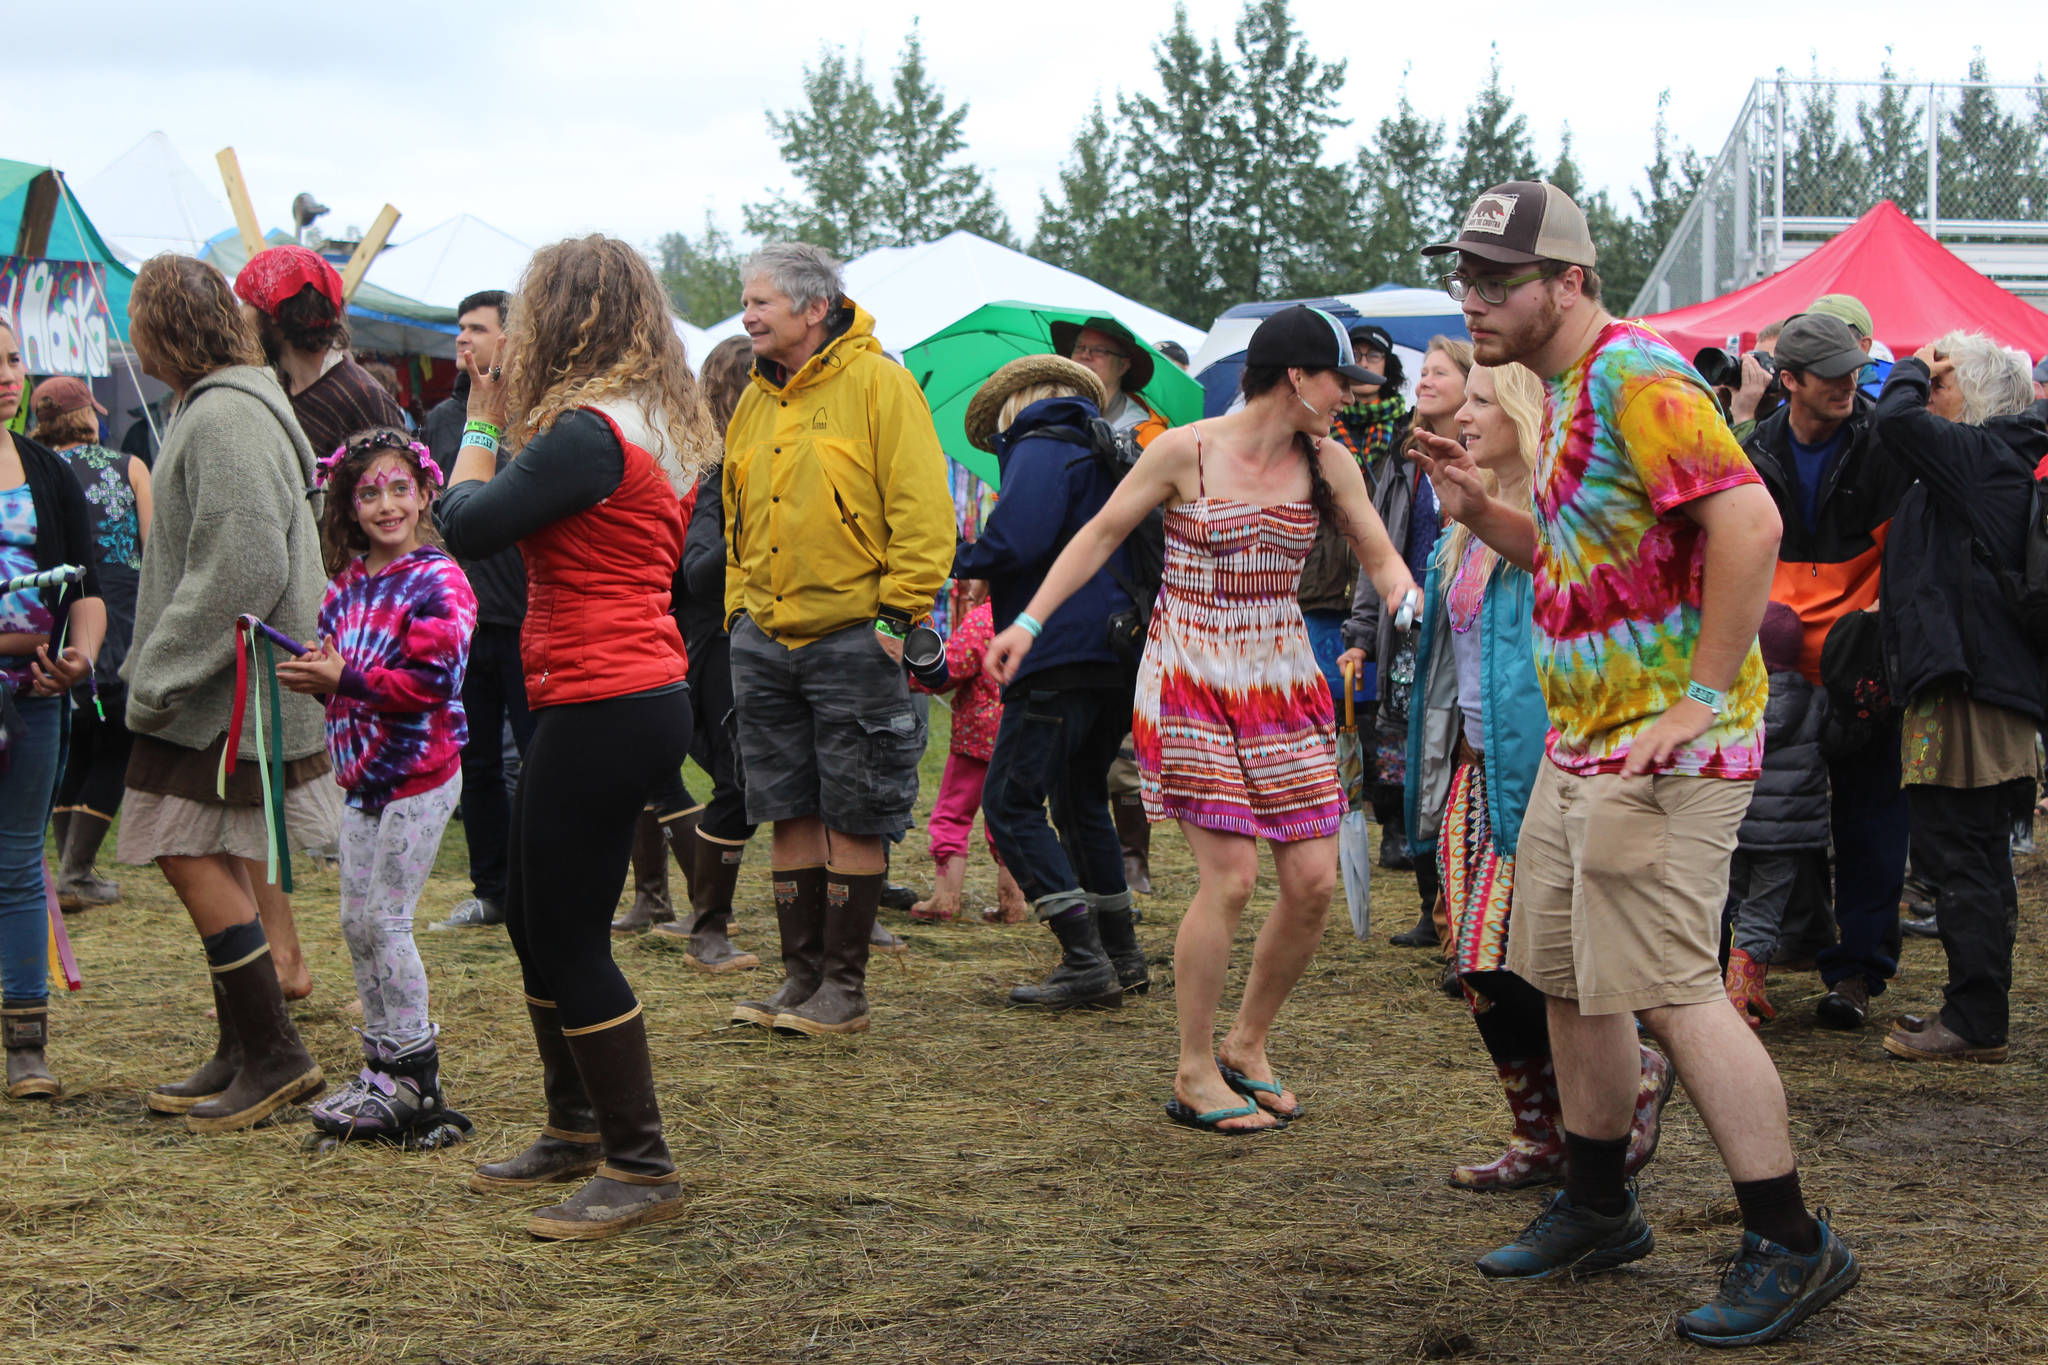 Festival-goers dance to The Inlaws and the Outlaws performance at Salmonfest’s River Stage on Aug. 6, 2016 in Ninilchi, Alaska. (File photo by Anna Frost/Homer News)